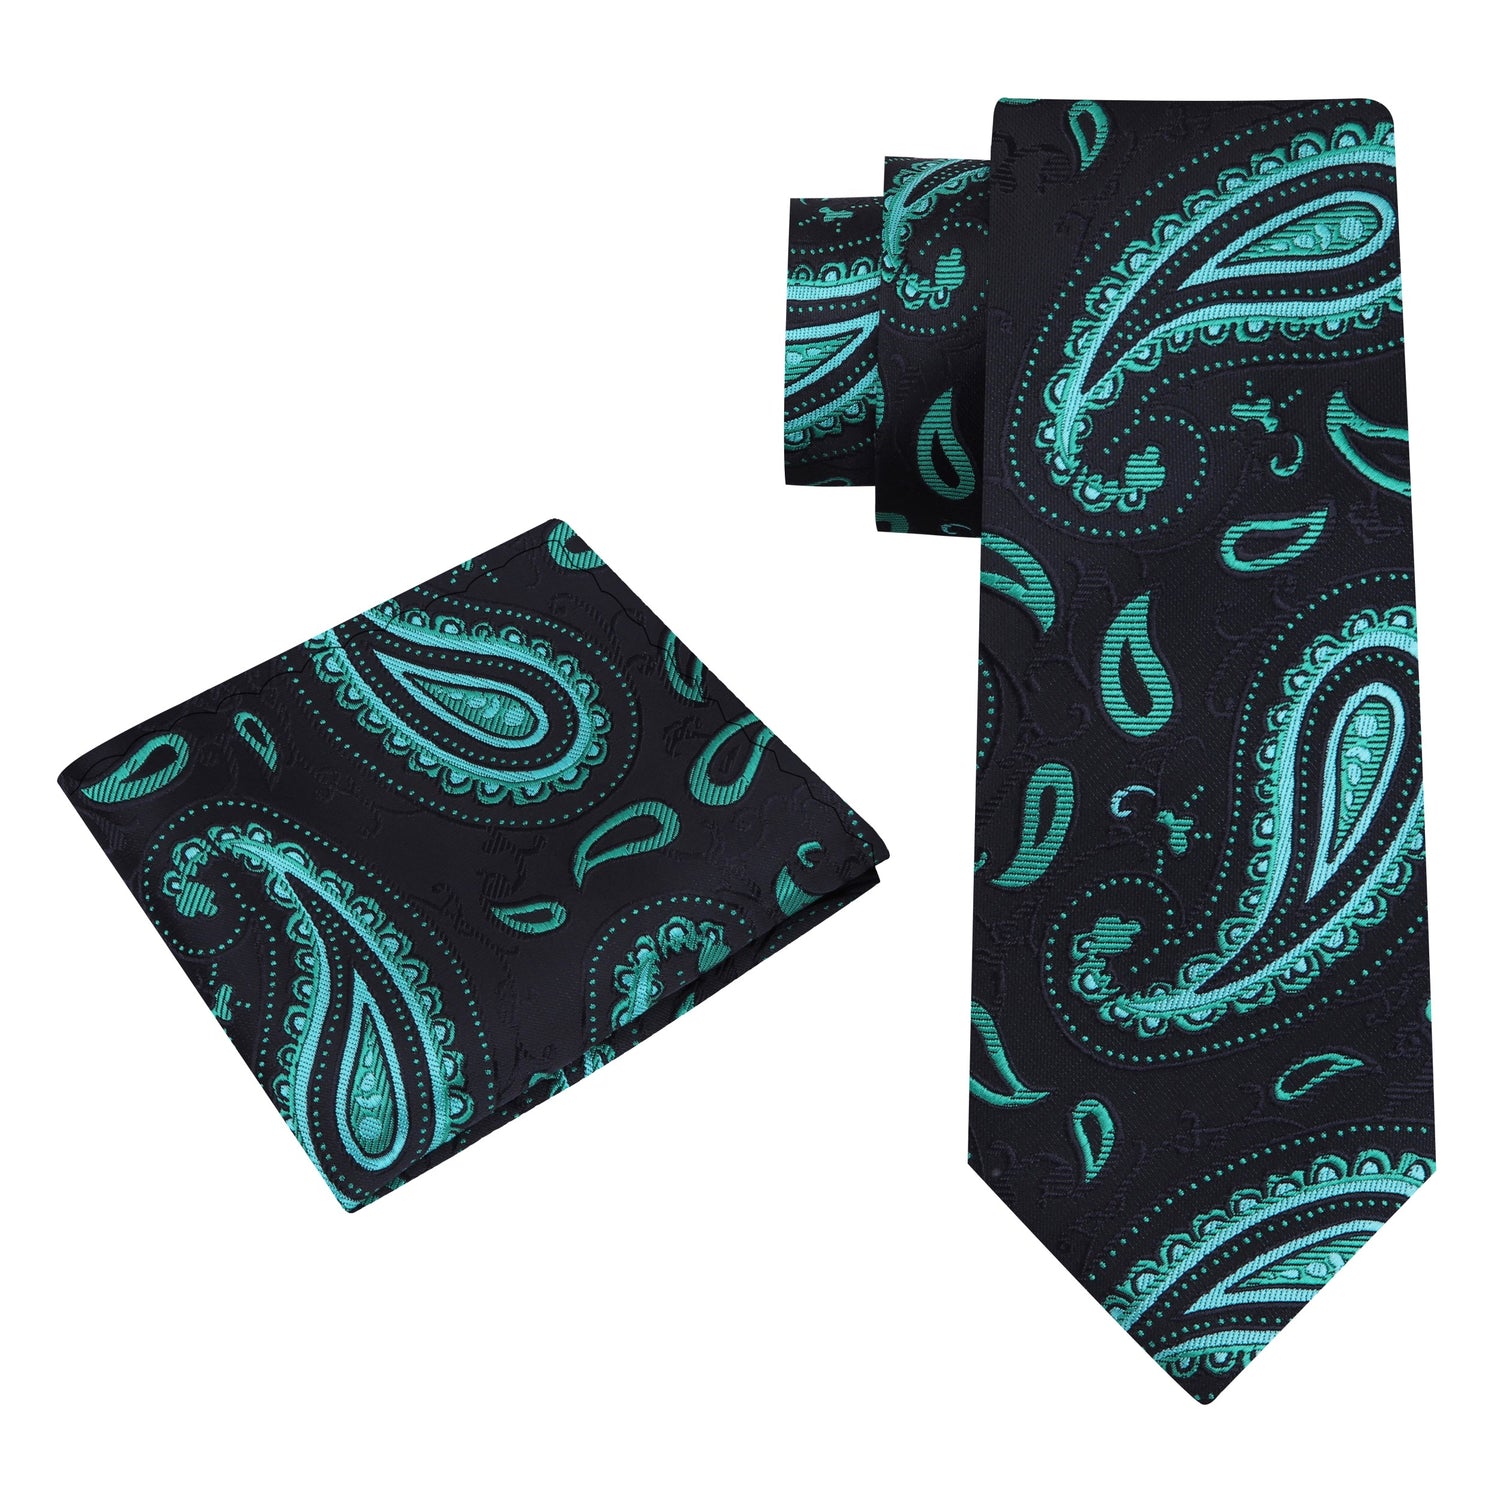 Alt View: A Black, Green Color Paisley Pattern Silk Necktie, Matching Pocket Square